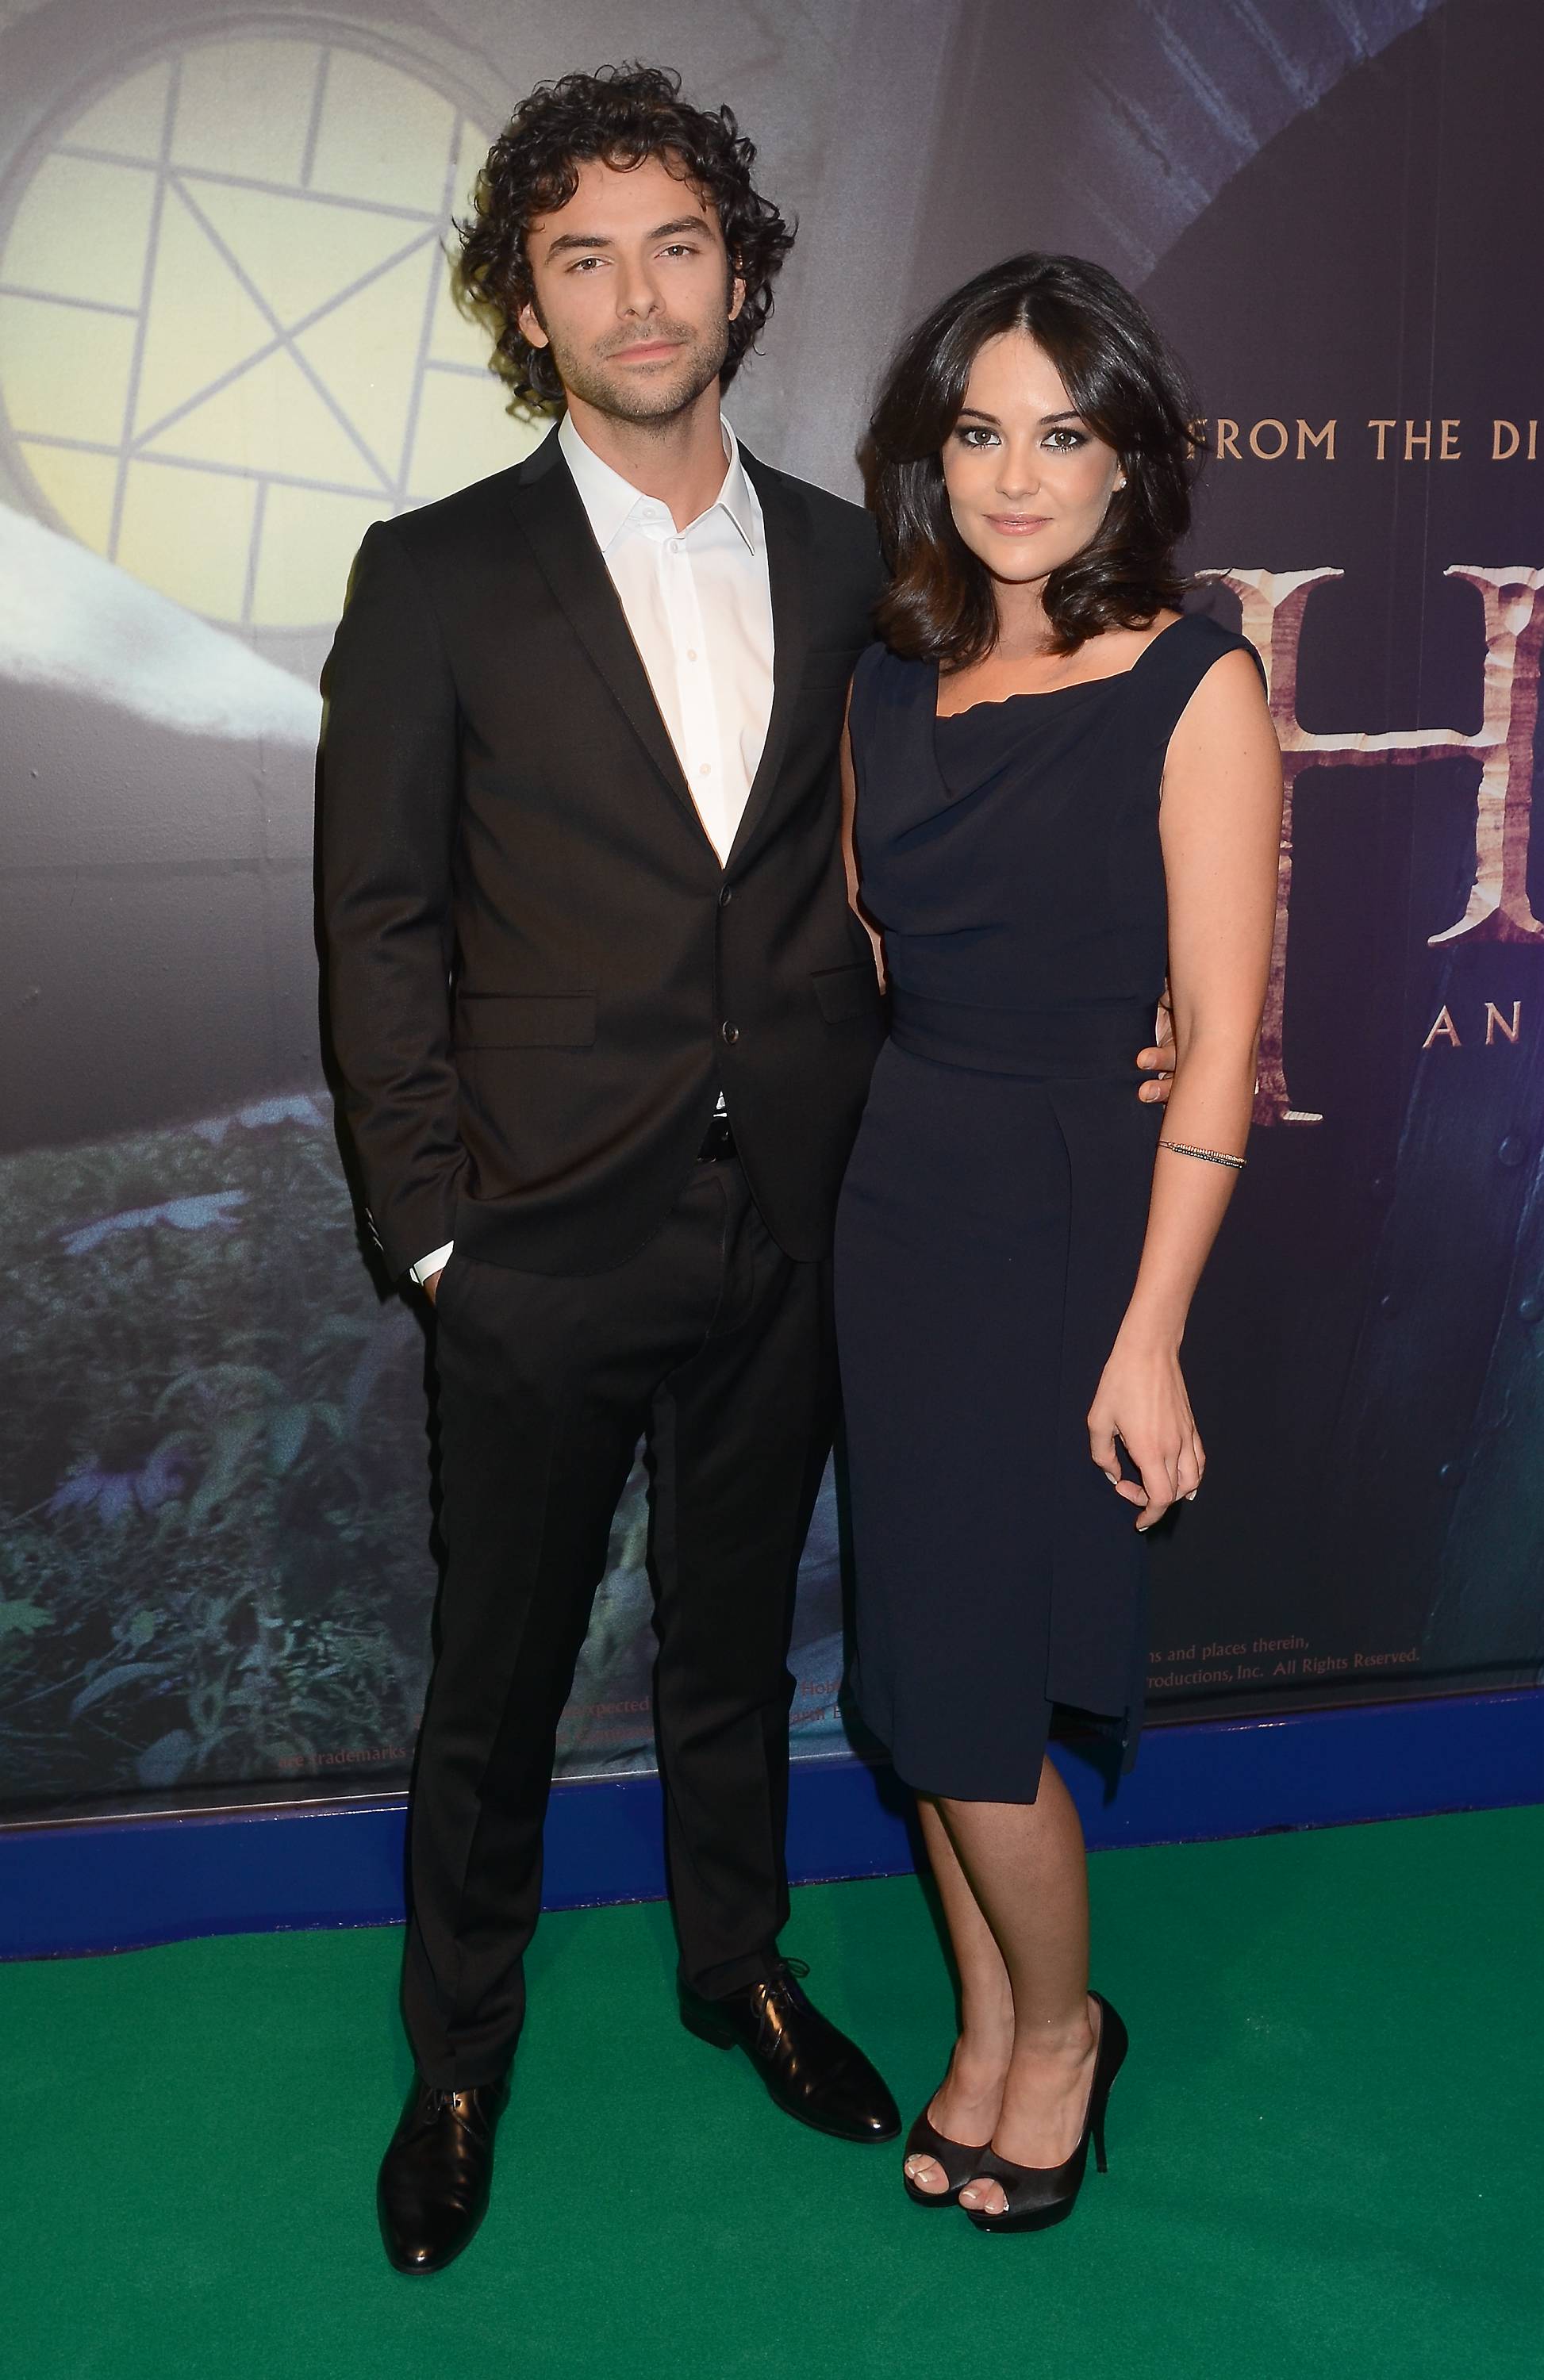 Irish Premiere of 'The Hobbit: An Unexpected Journey' at The Savoy